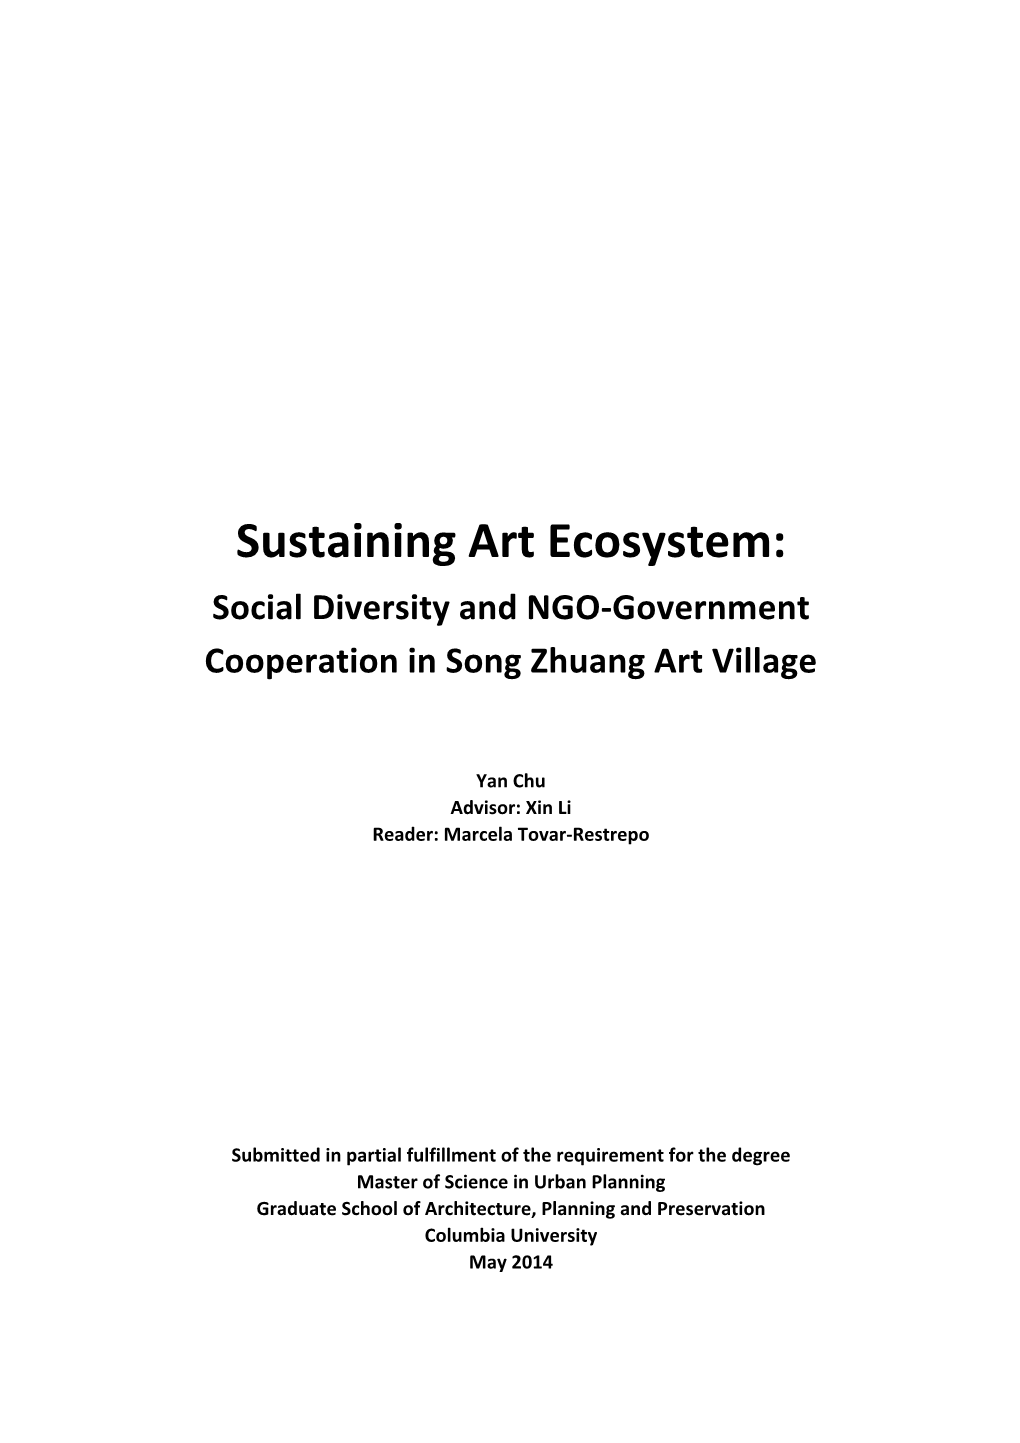 Sustaining Art Ecosystem: Social Diversity and NGO-Government Cooperation in Song Zhuang Art Village